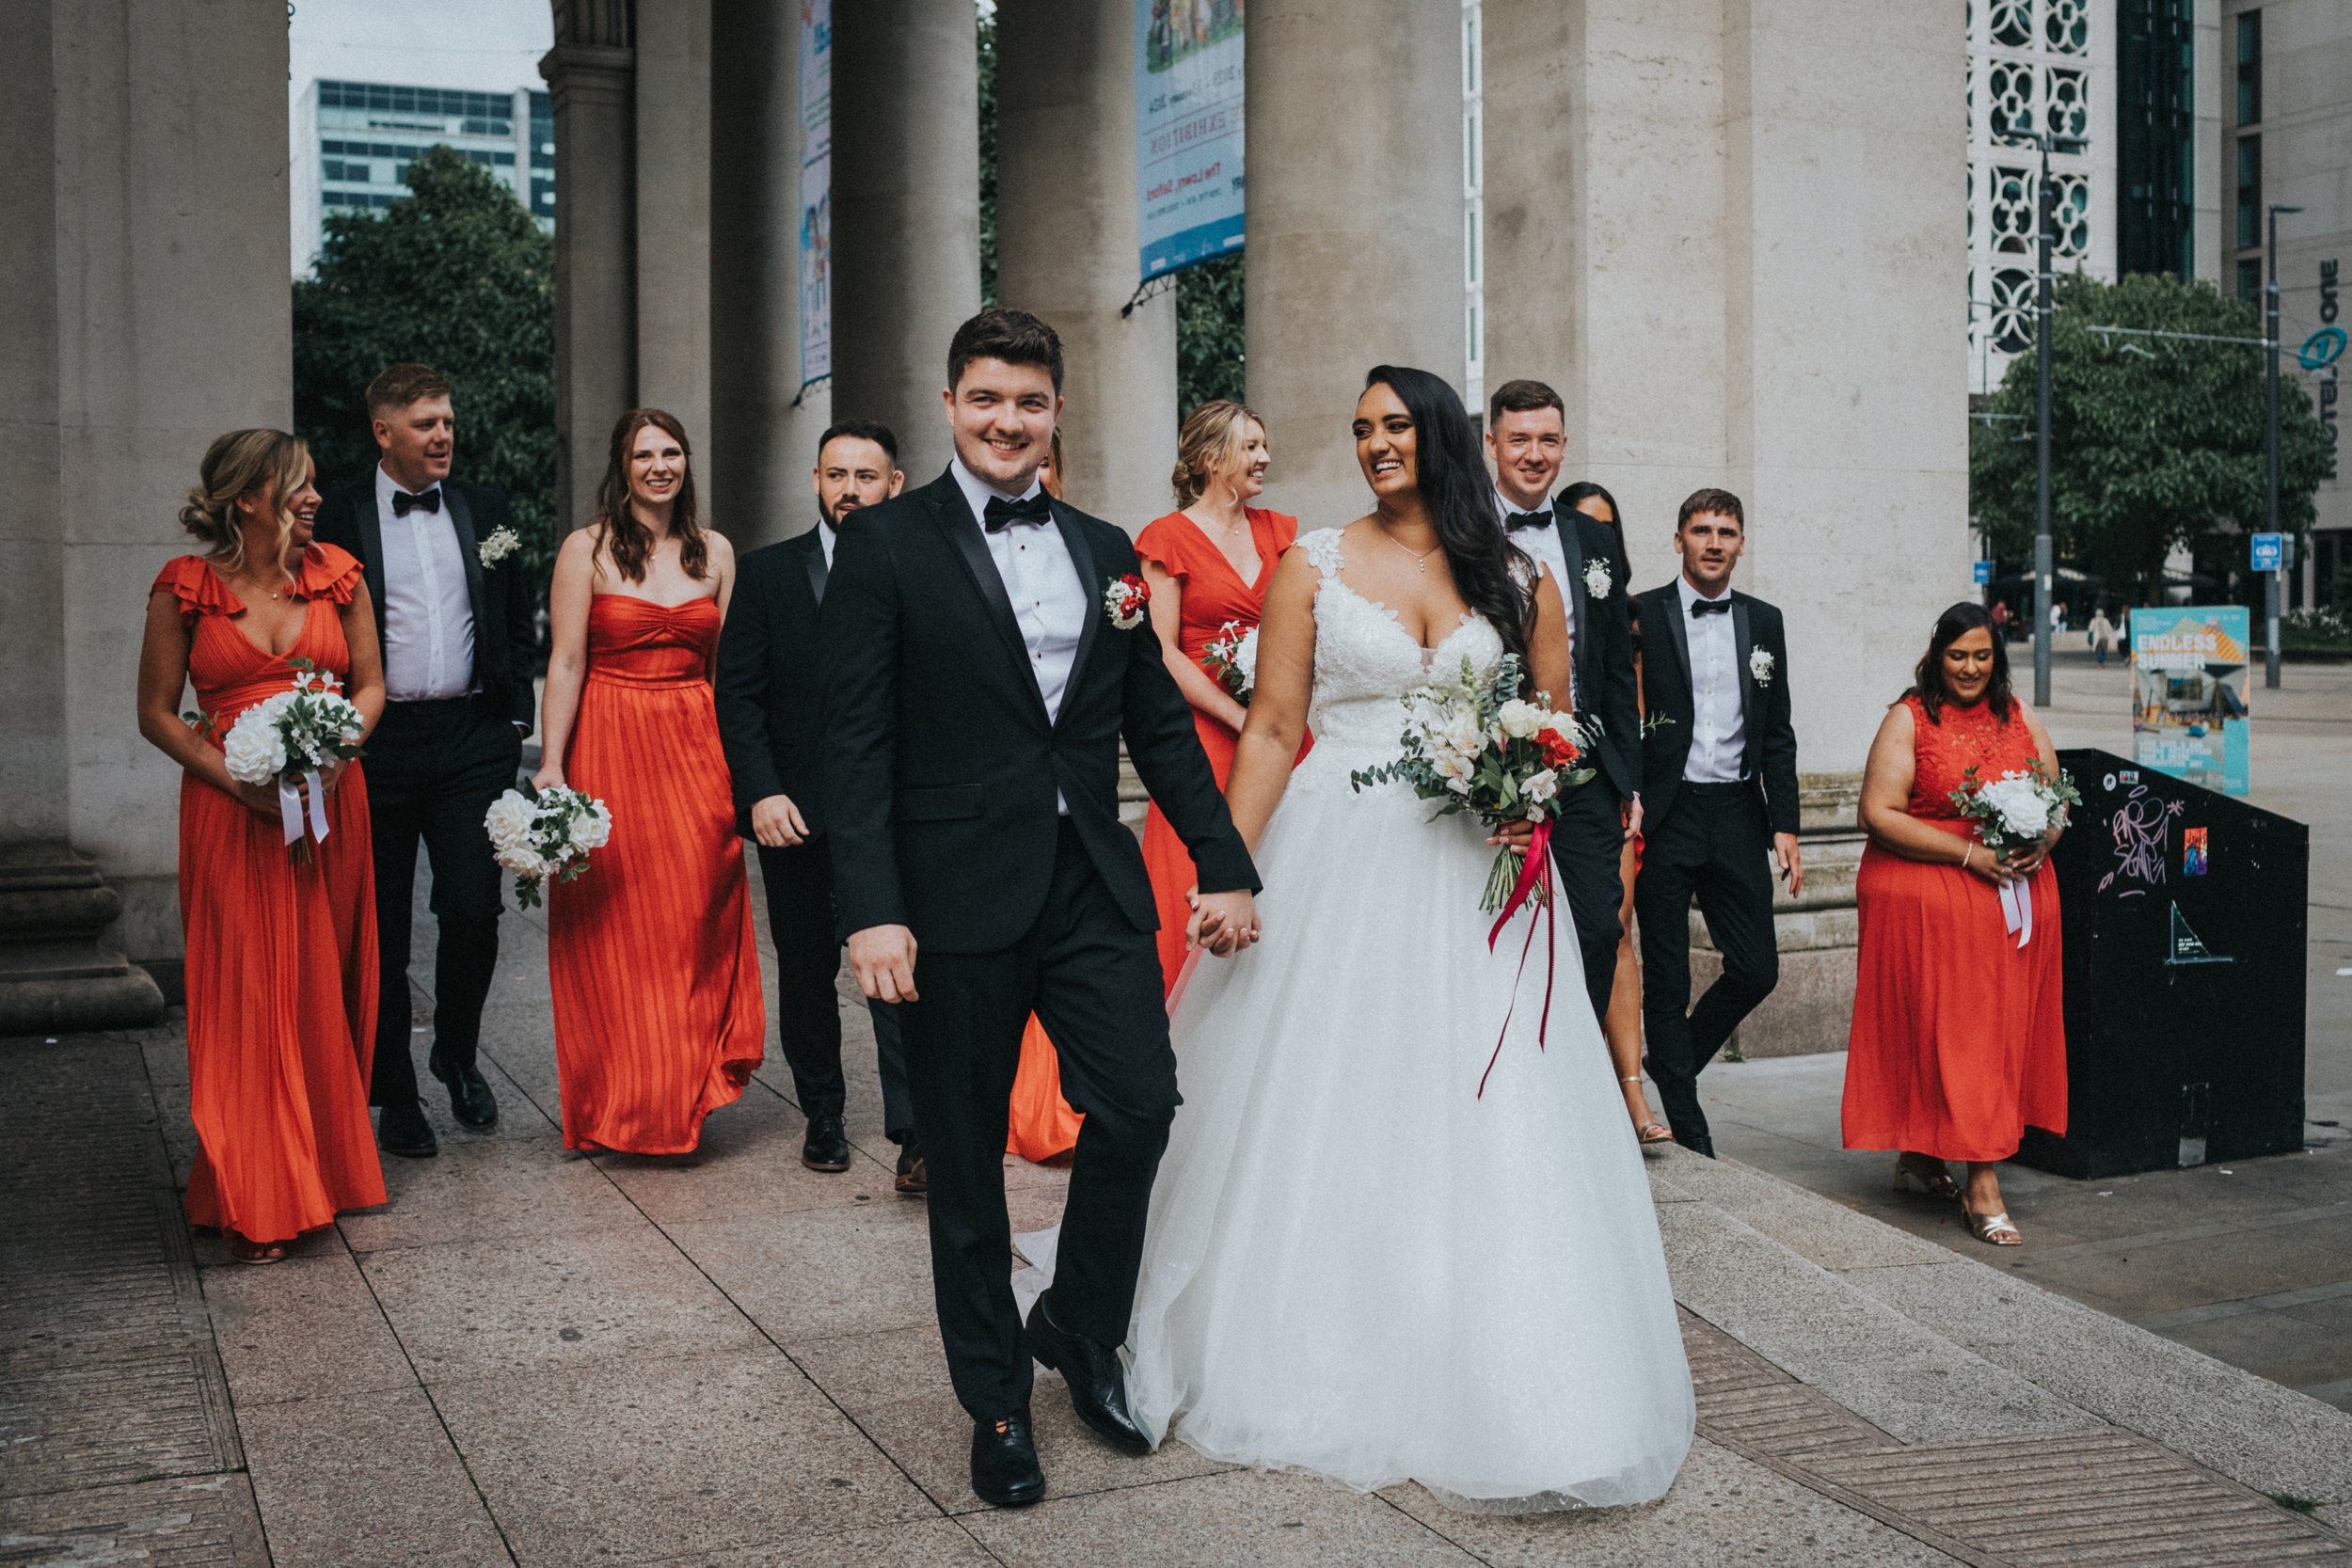 Bride and Groom walk together with their bridesmaids and groomsmen following them. 